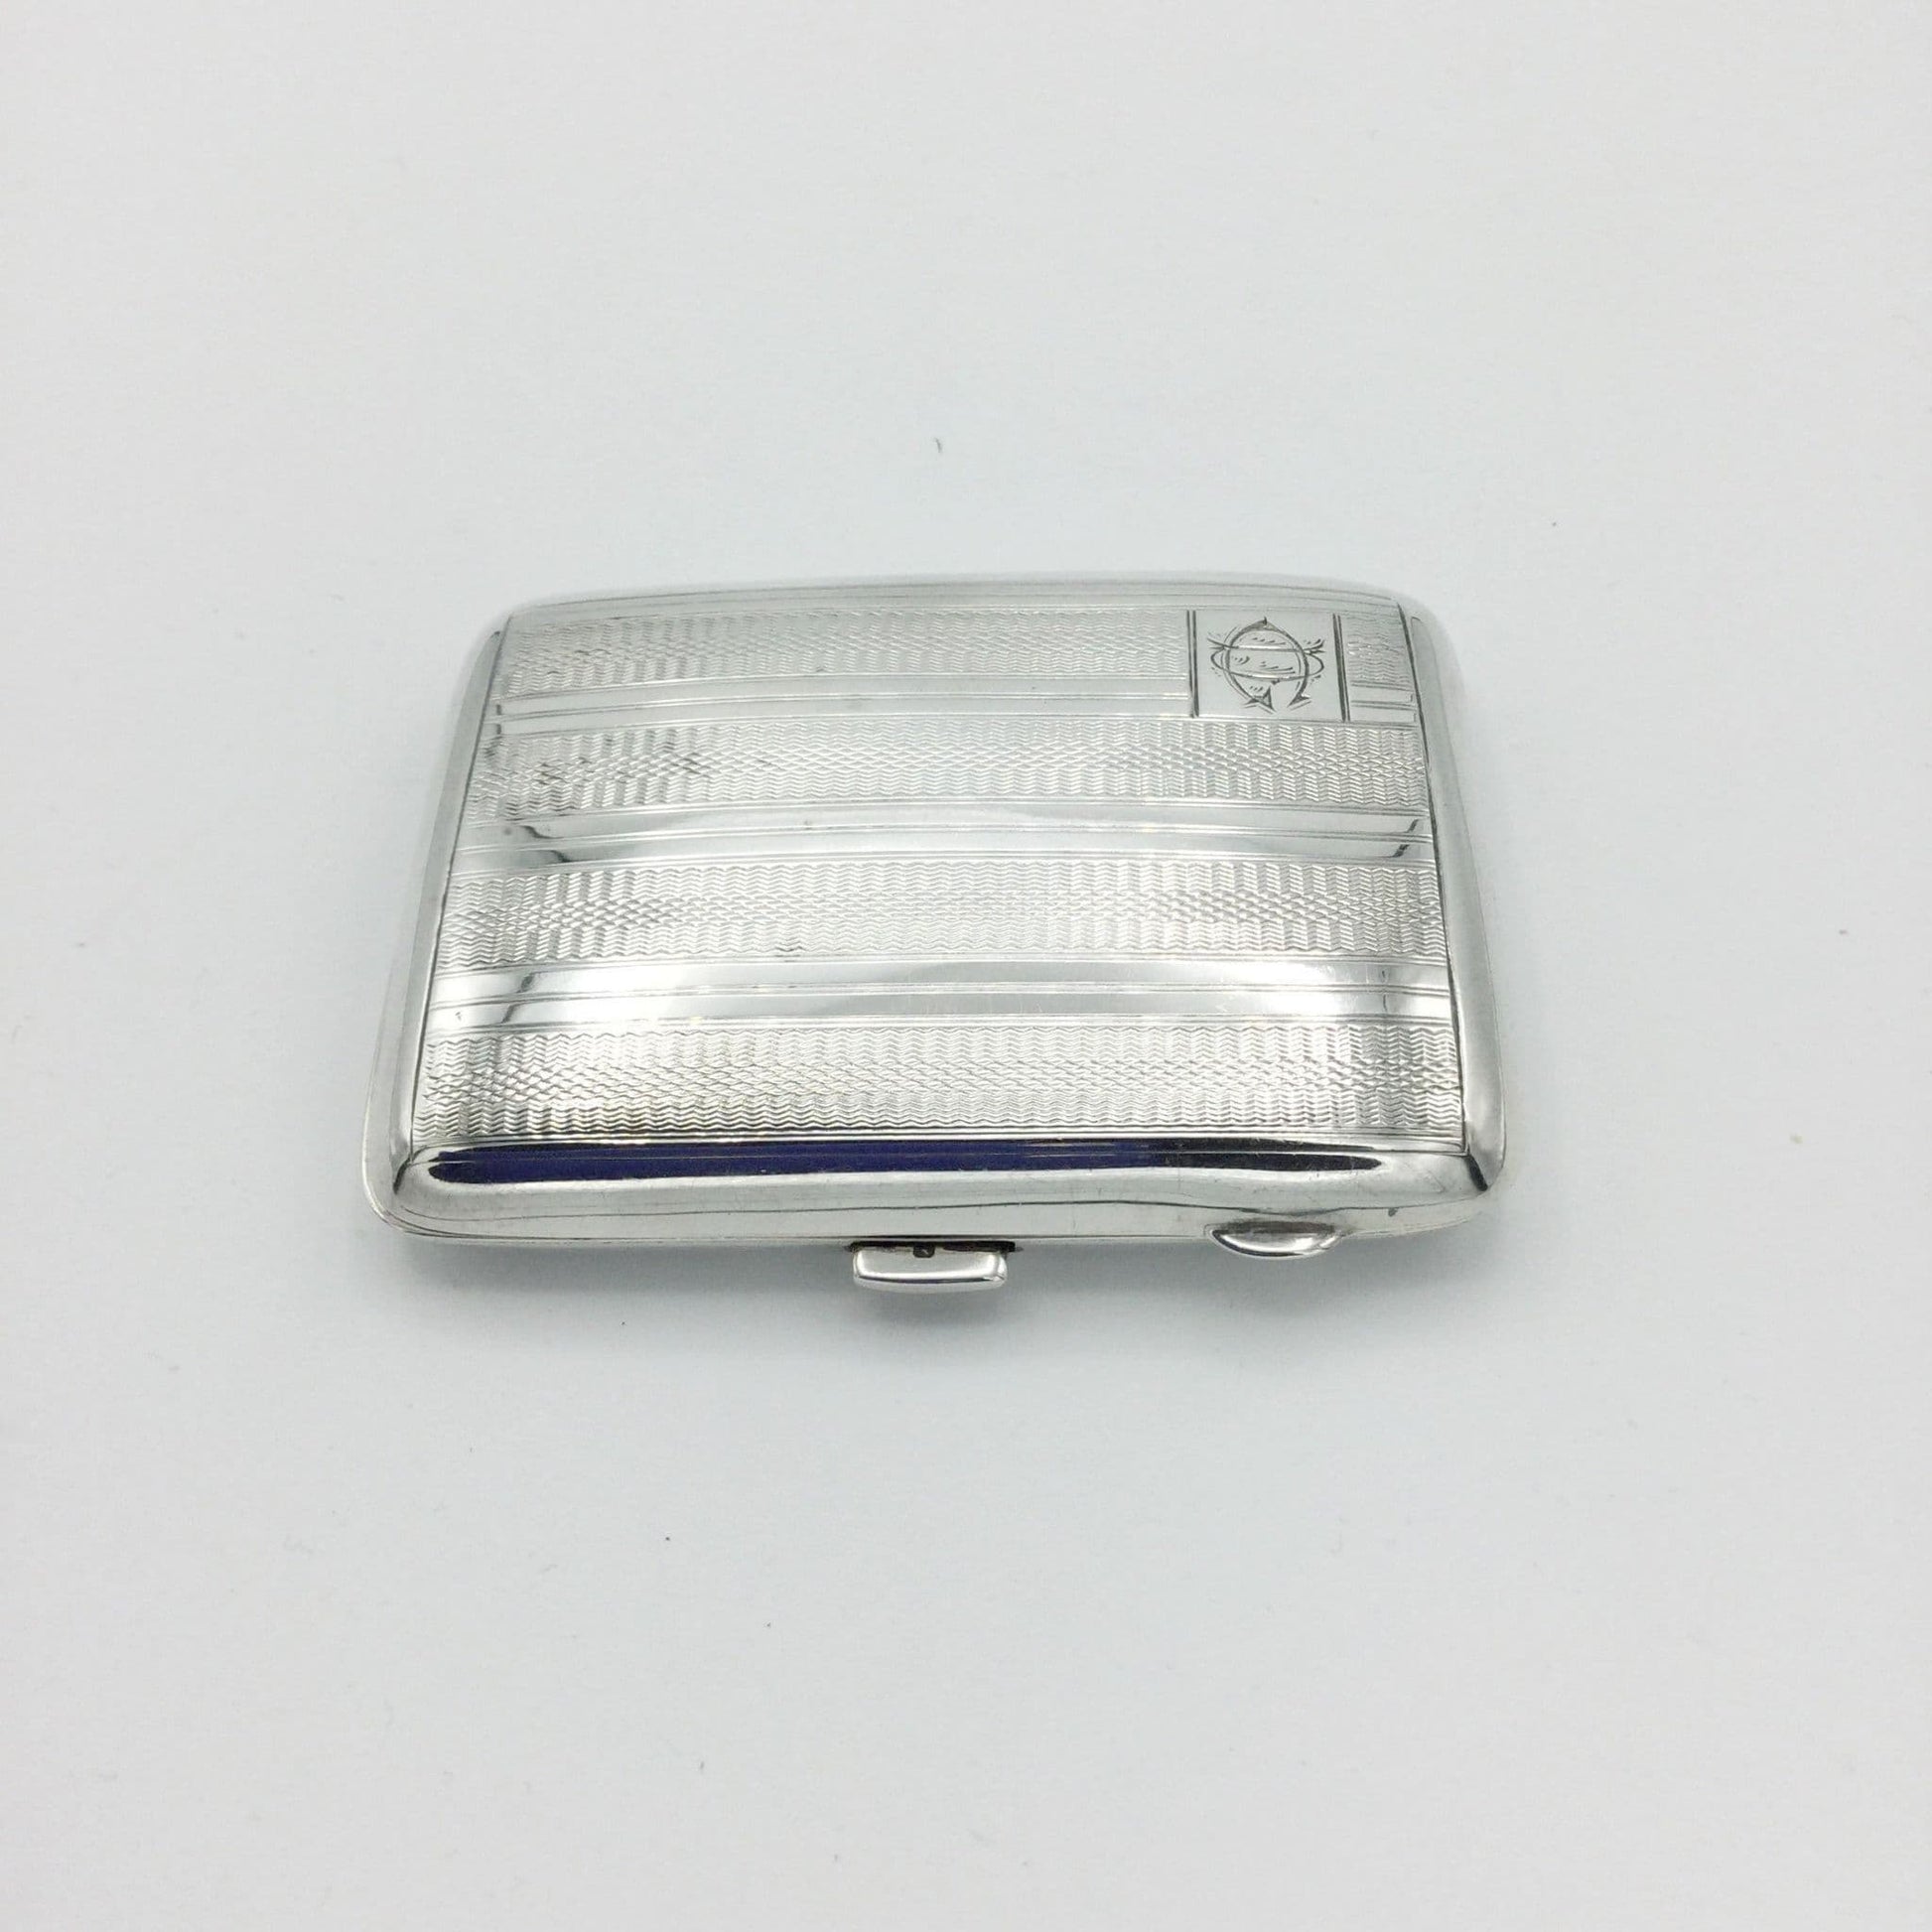 1930s Art Deco Silver cigarette case showing the clasp on a white background